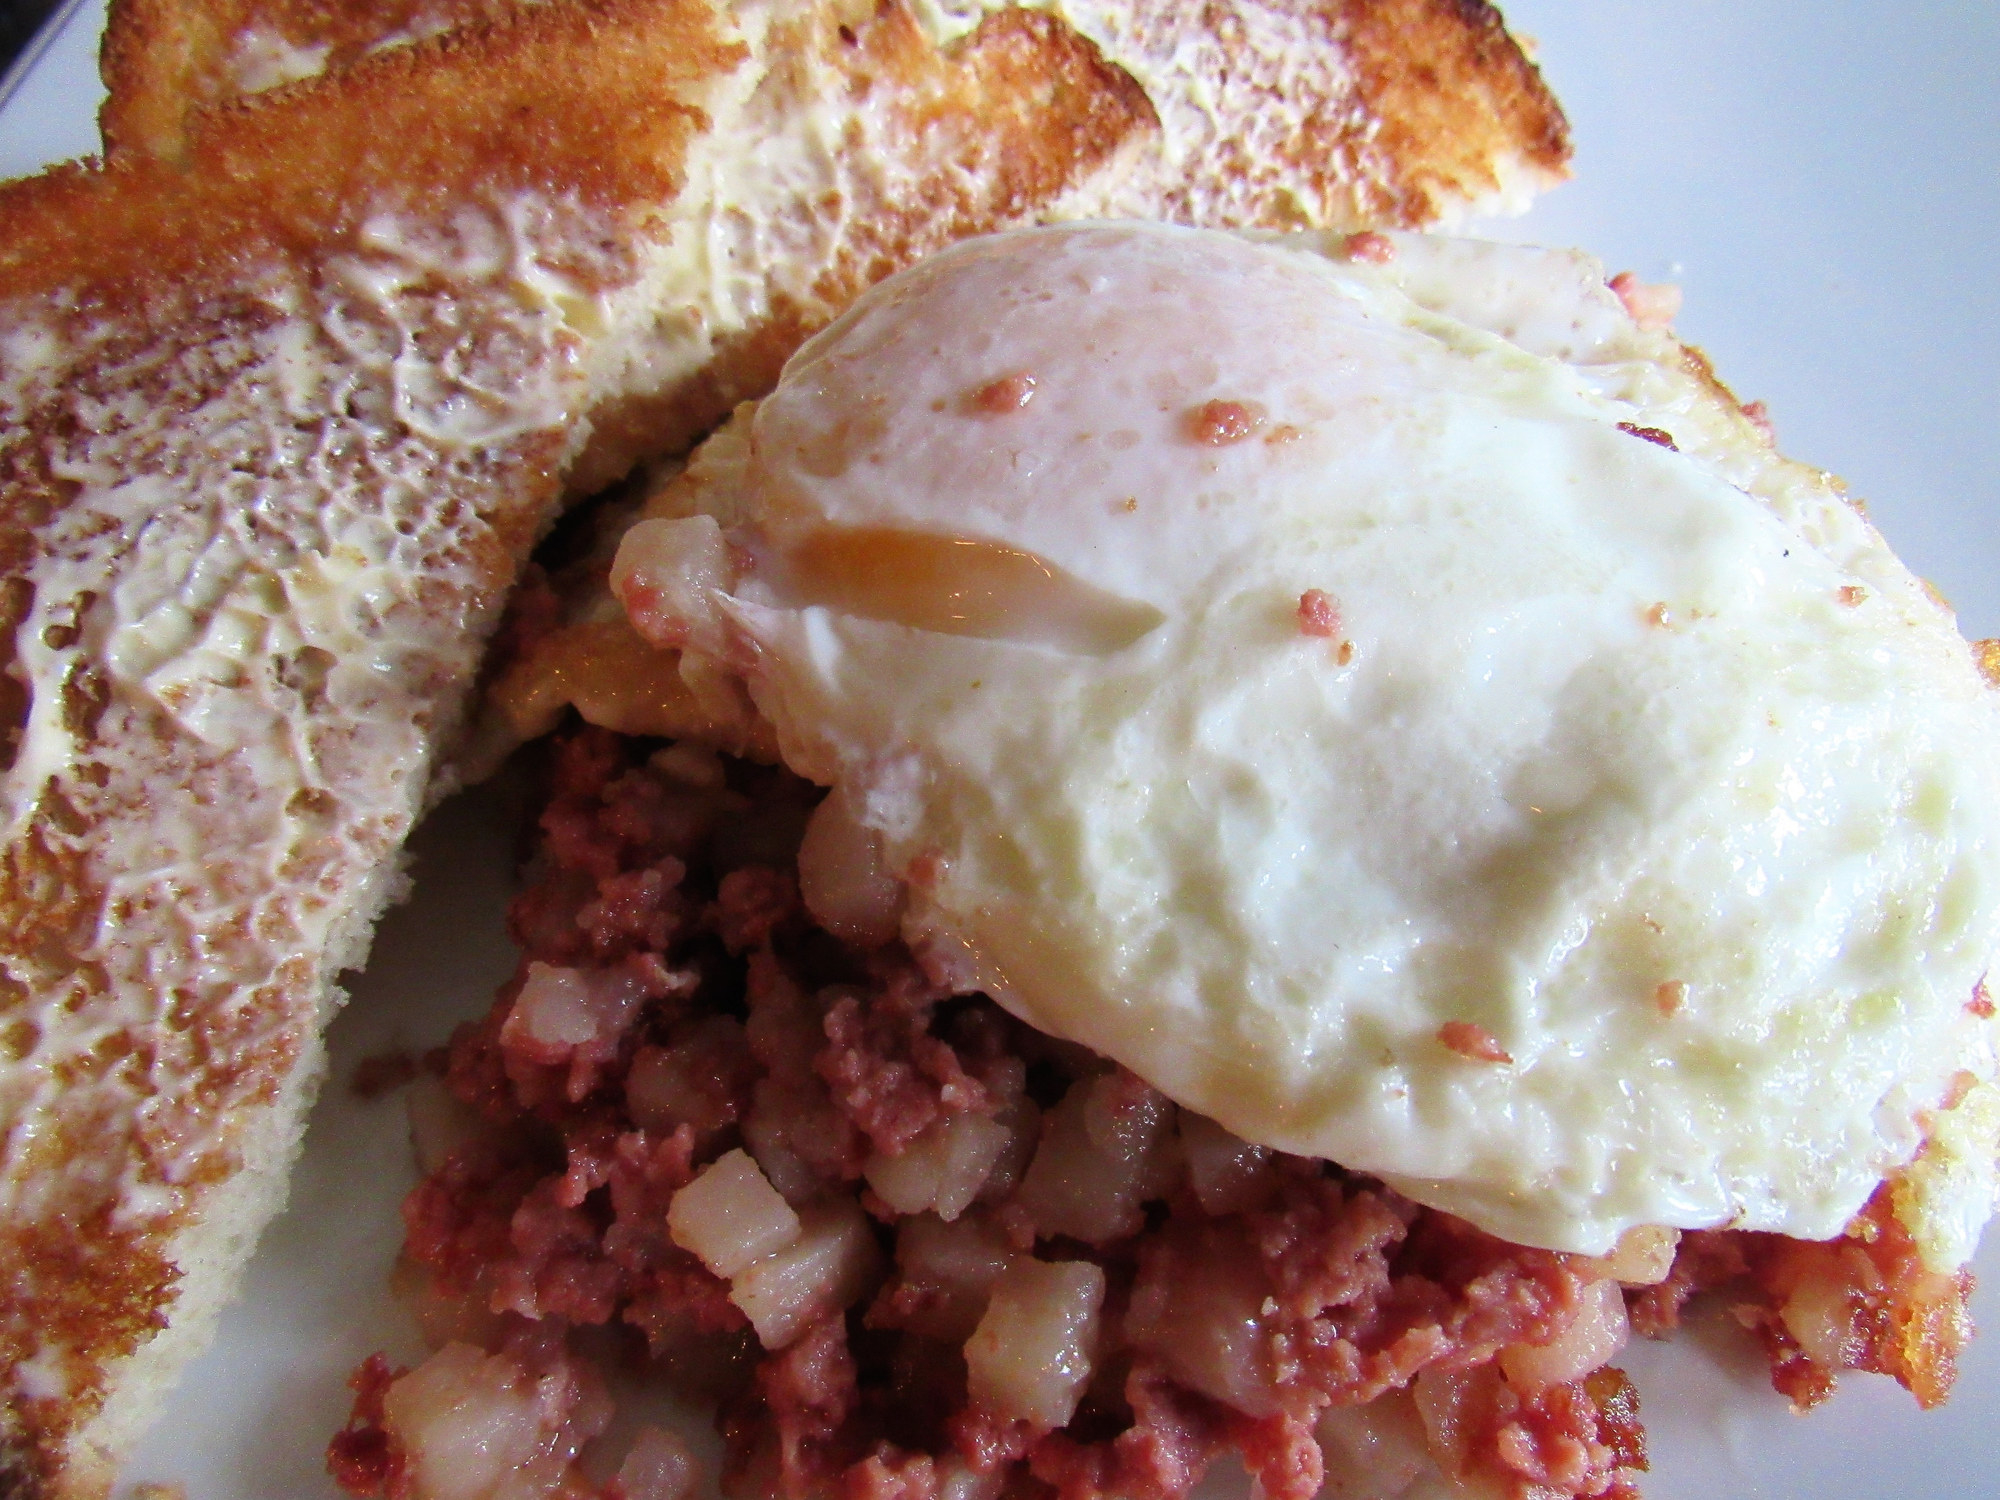 Corned beef hash with an egg on it